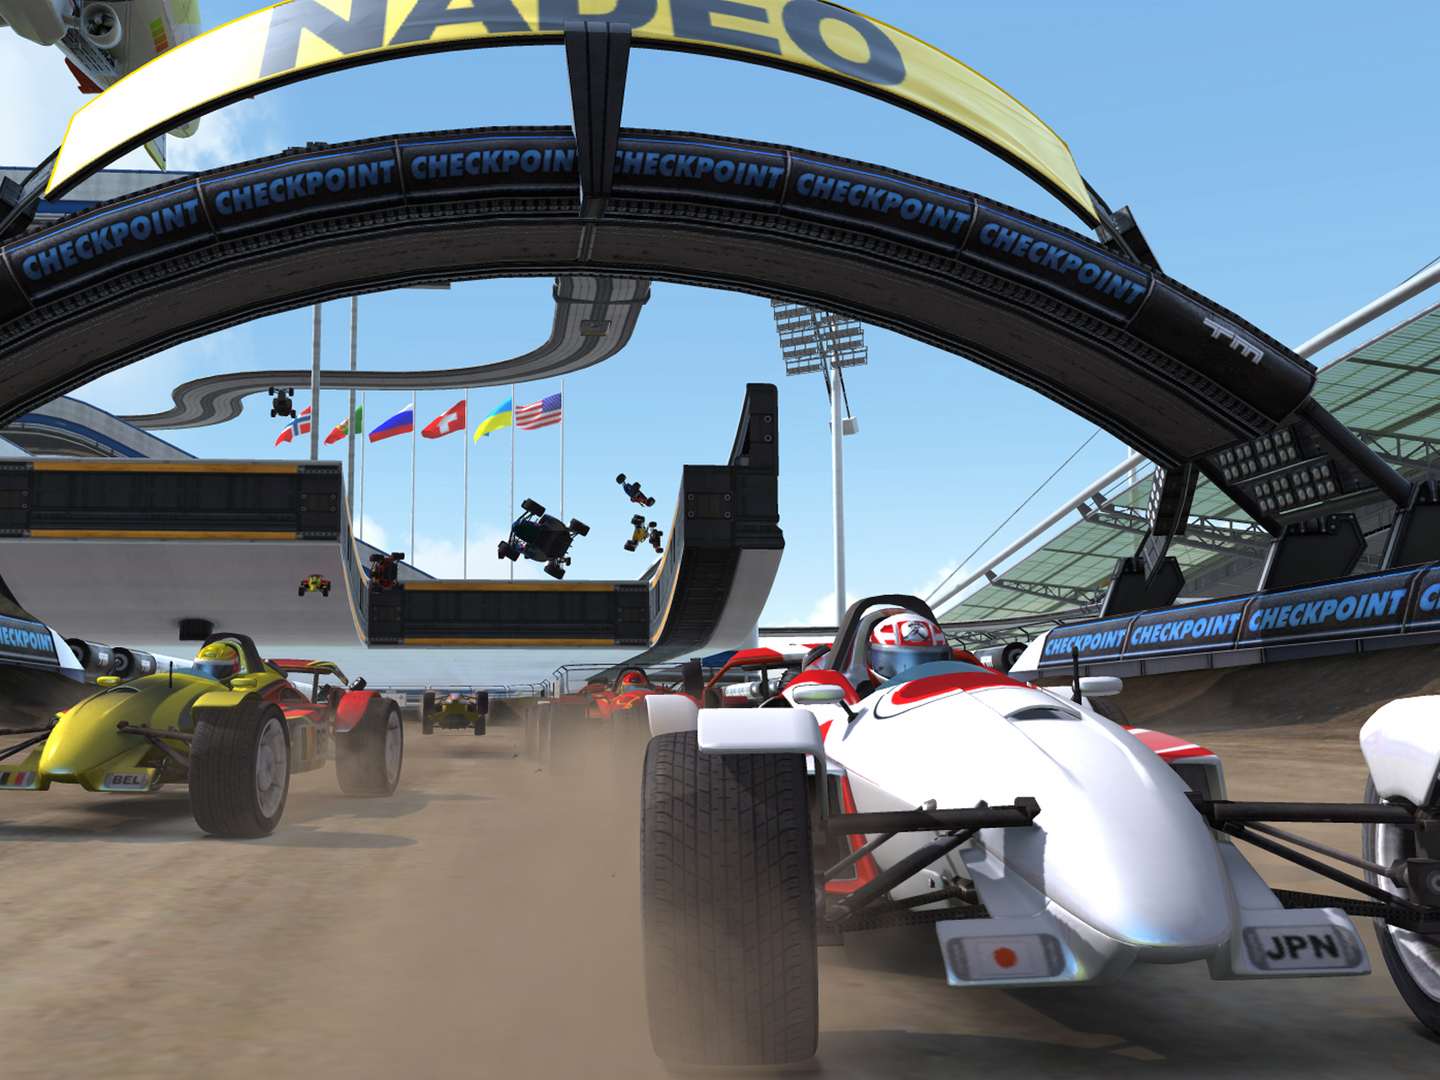 trackmania for mac download